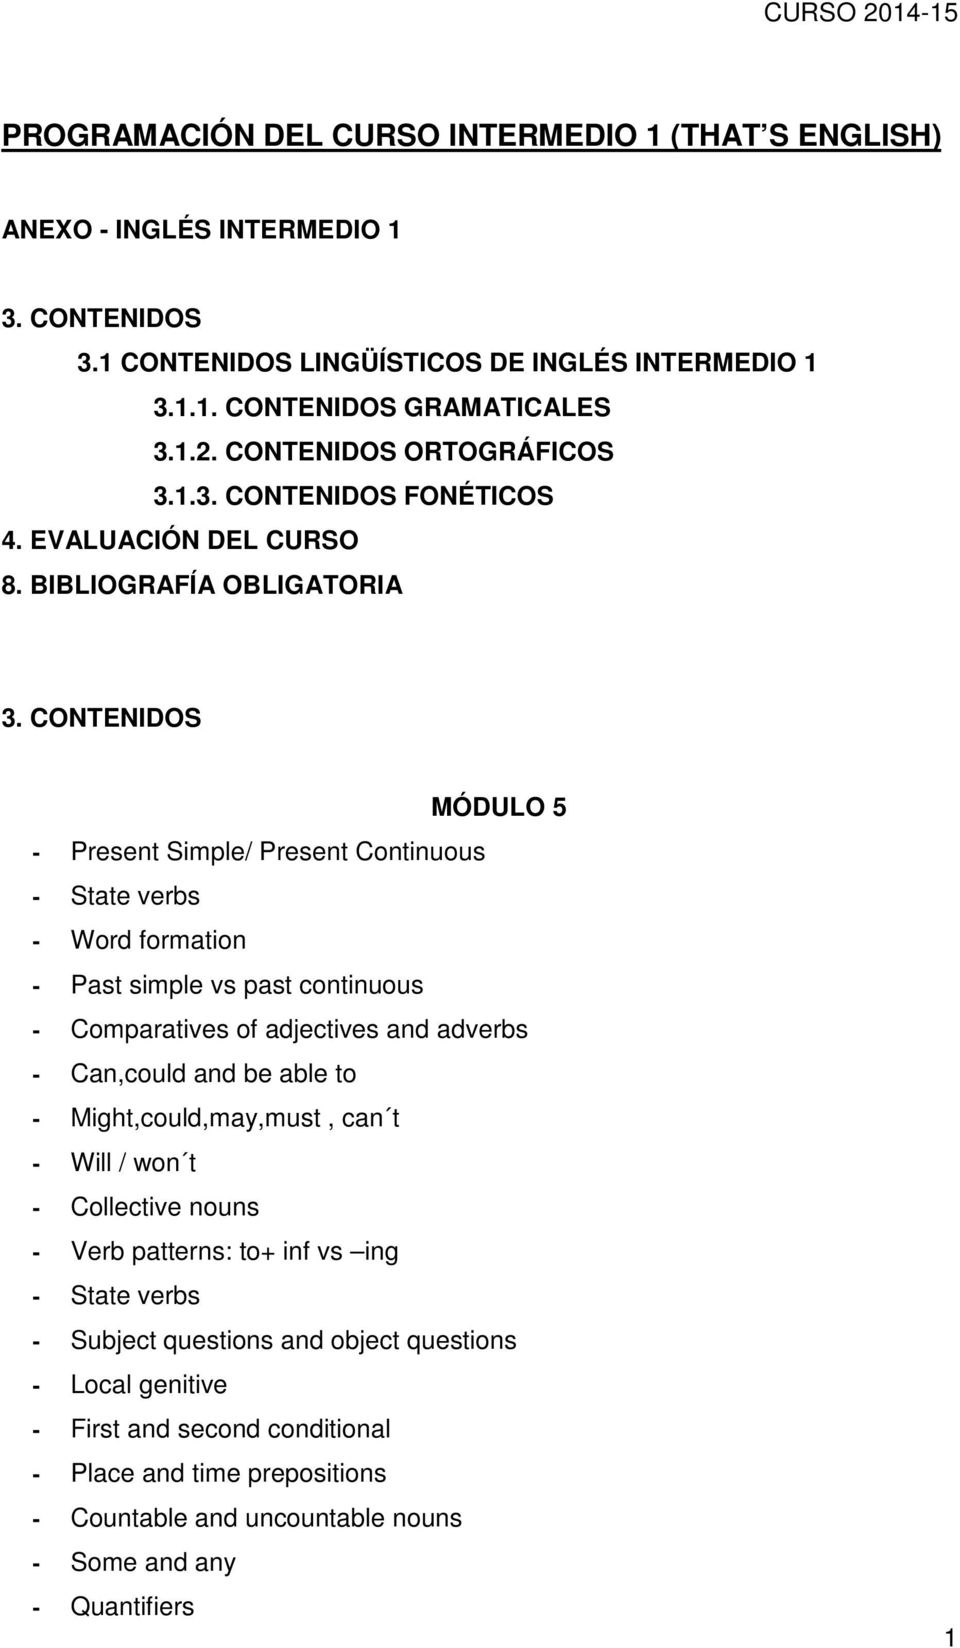 CONTENIDOS MÓDULO 5 - Present Simple/ Present Continuous - State verbs - Word formation - Past simple vs past continuous - Comparatives of adjectives and adverbs - Can,could and be able to -